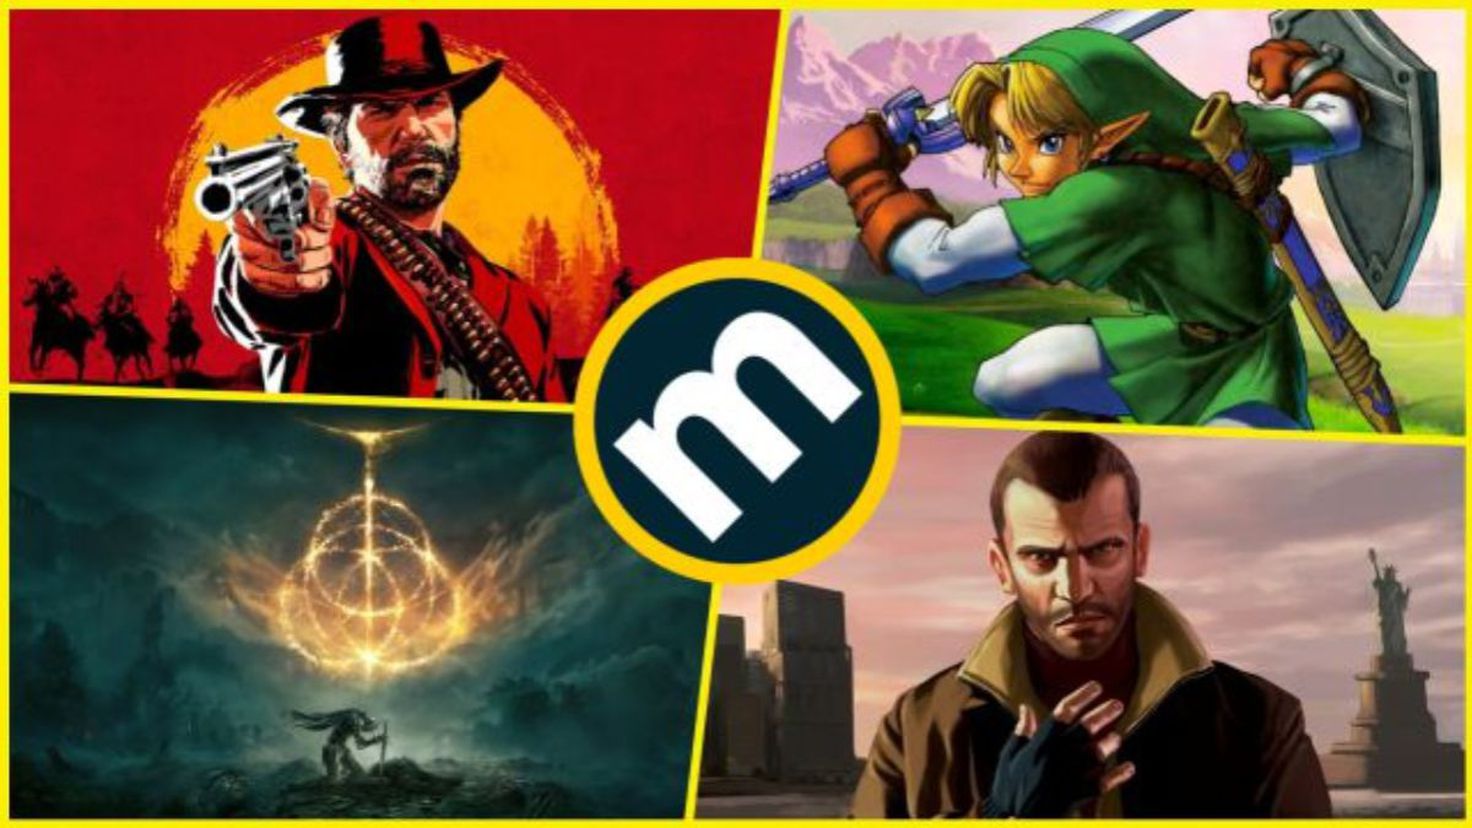 These are the 100 best games of all time, according to Metacritic -  Meristation